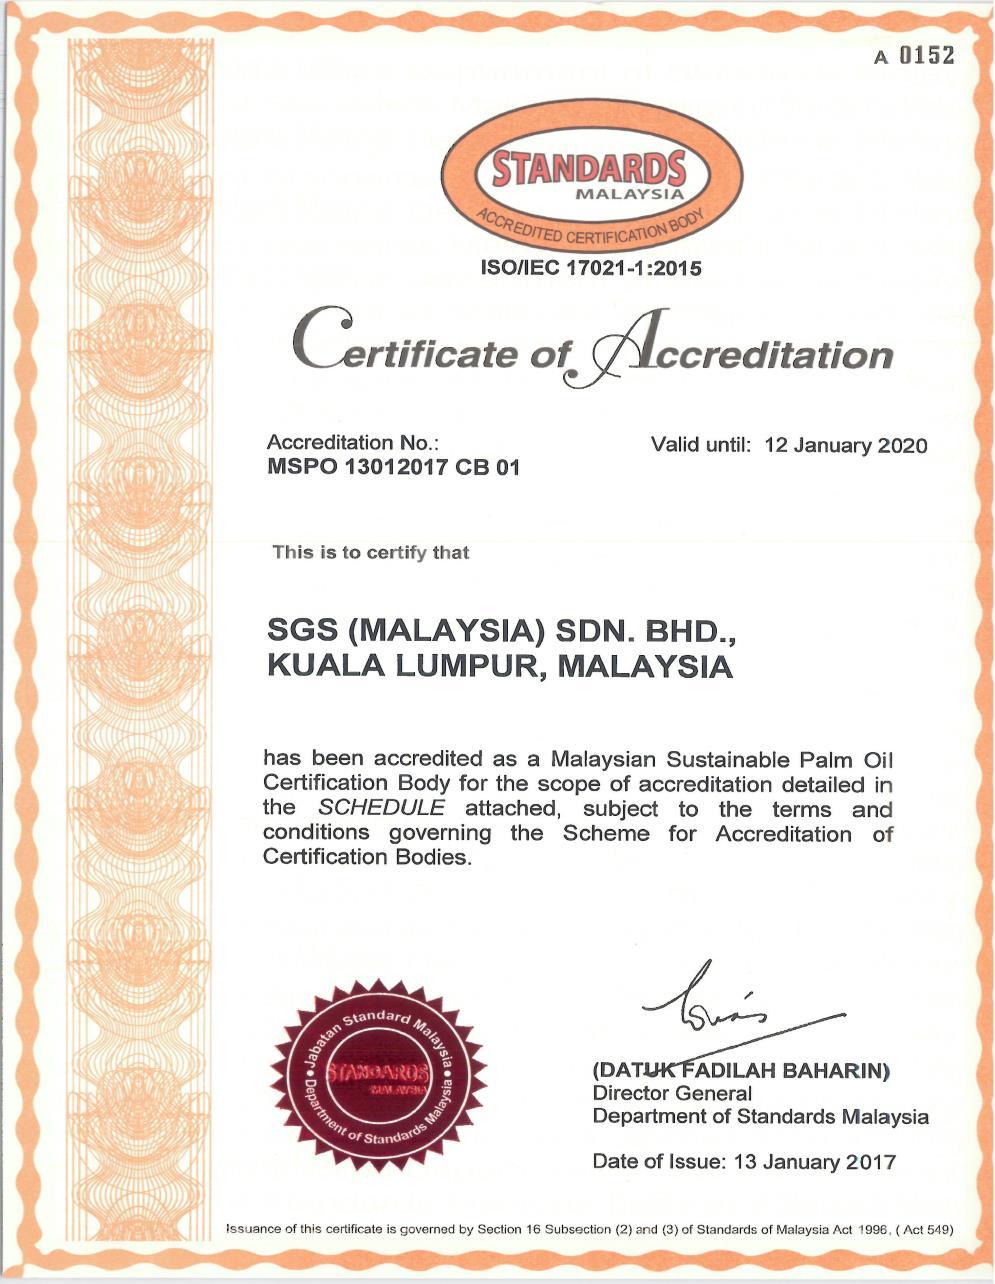 ACCREDITED CB BY STANDARDS MALAYSIA FOR MSPO SCHEME